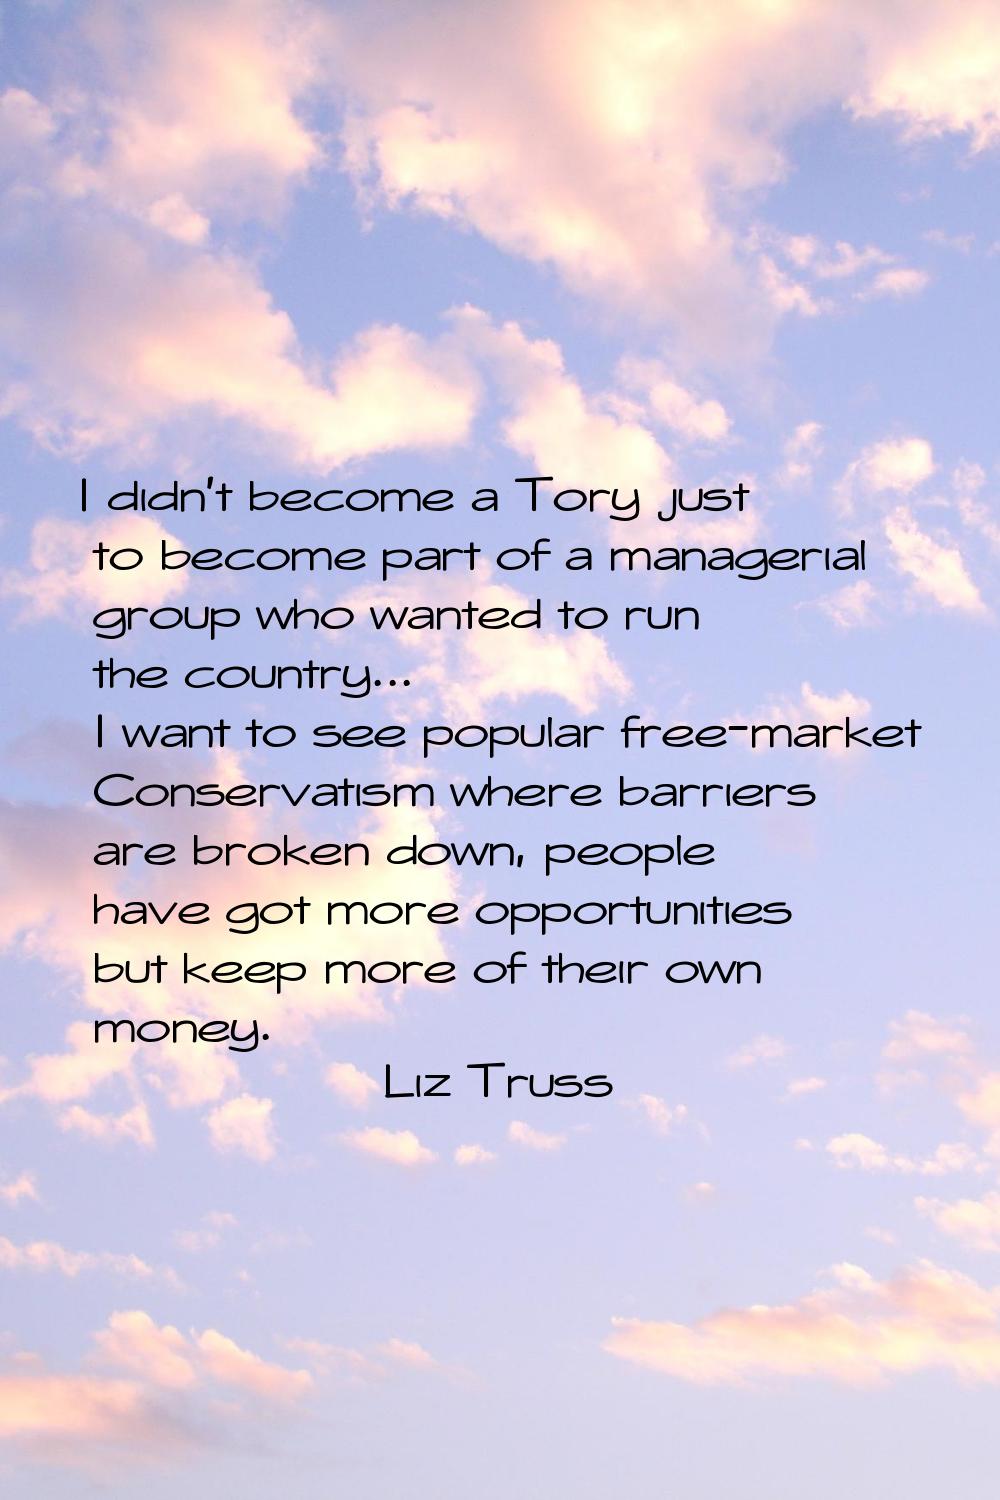 I didn't become a Tory just to become part of a managerial group who wanted to run the country... I